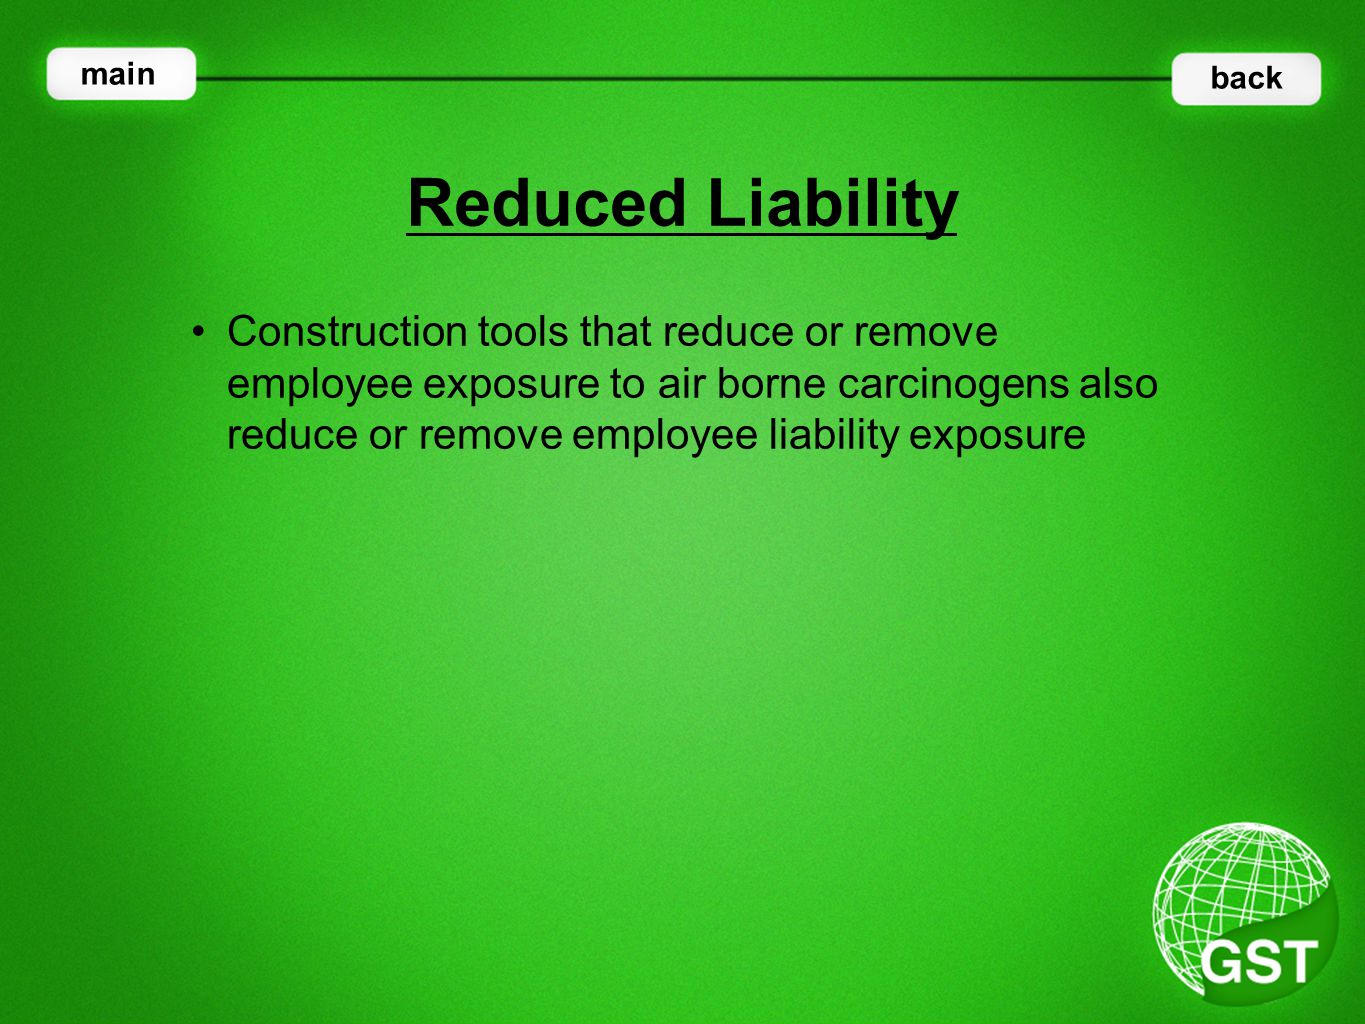 Construction tools that reduce or remove employee exposure to air borne carcinogens also reduce or remove employee liability exposure Reduced Liability main back